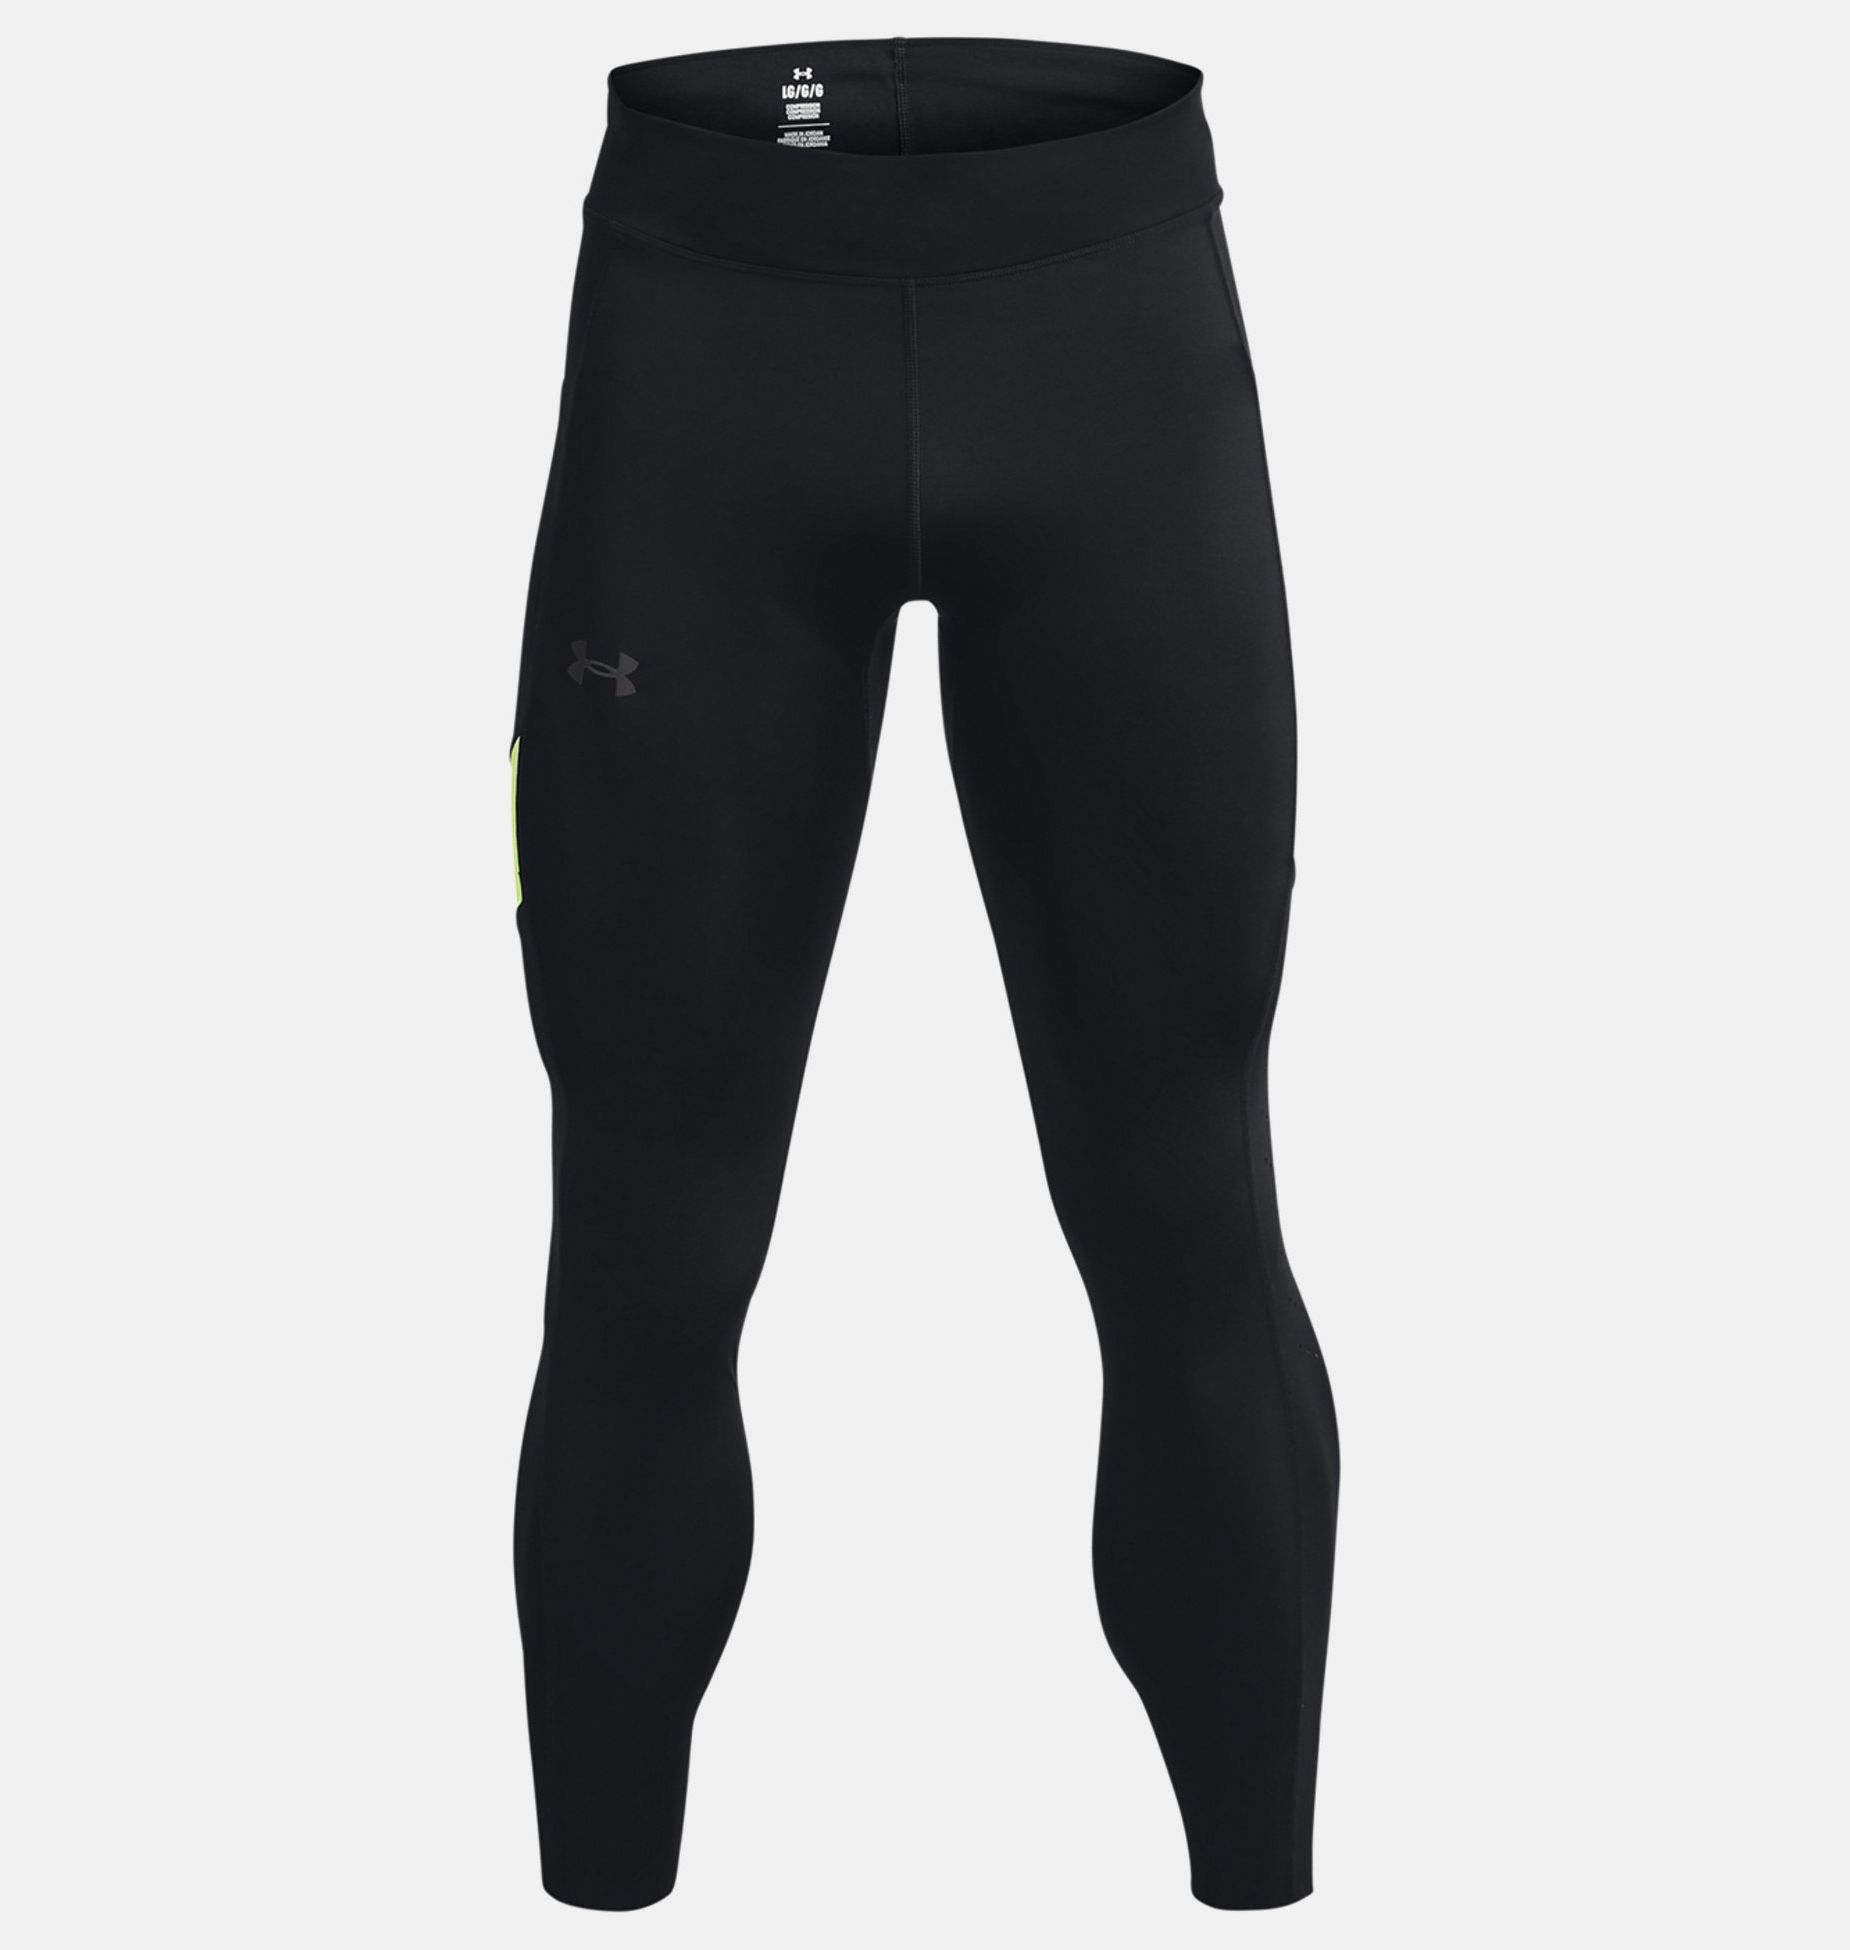 https://img2.sportconcept.com/backend_nou/content/images/fitness-under-armour%20speedpocket-tights-20230413160550.jpg